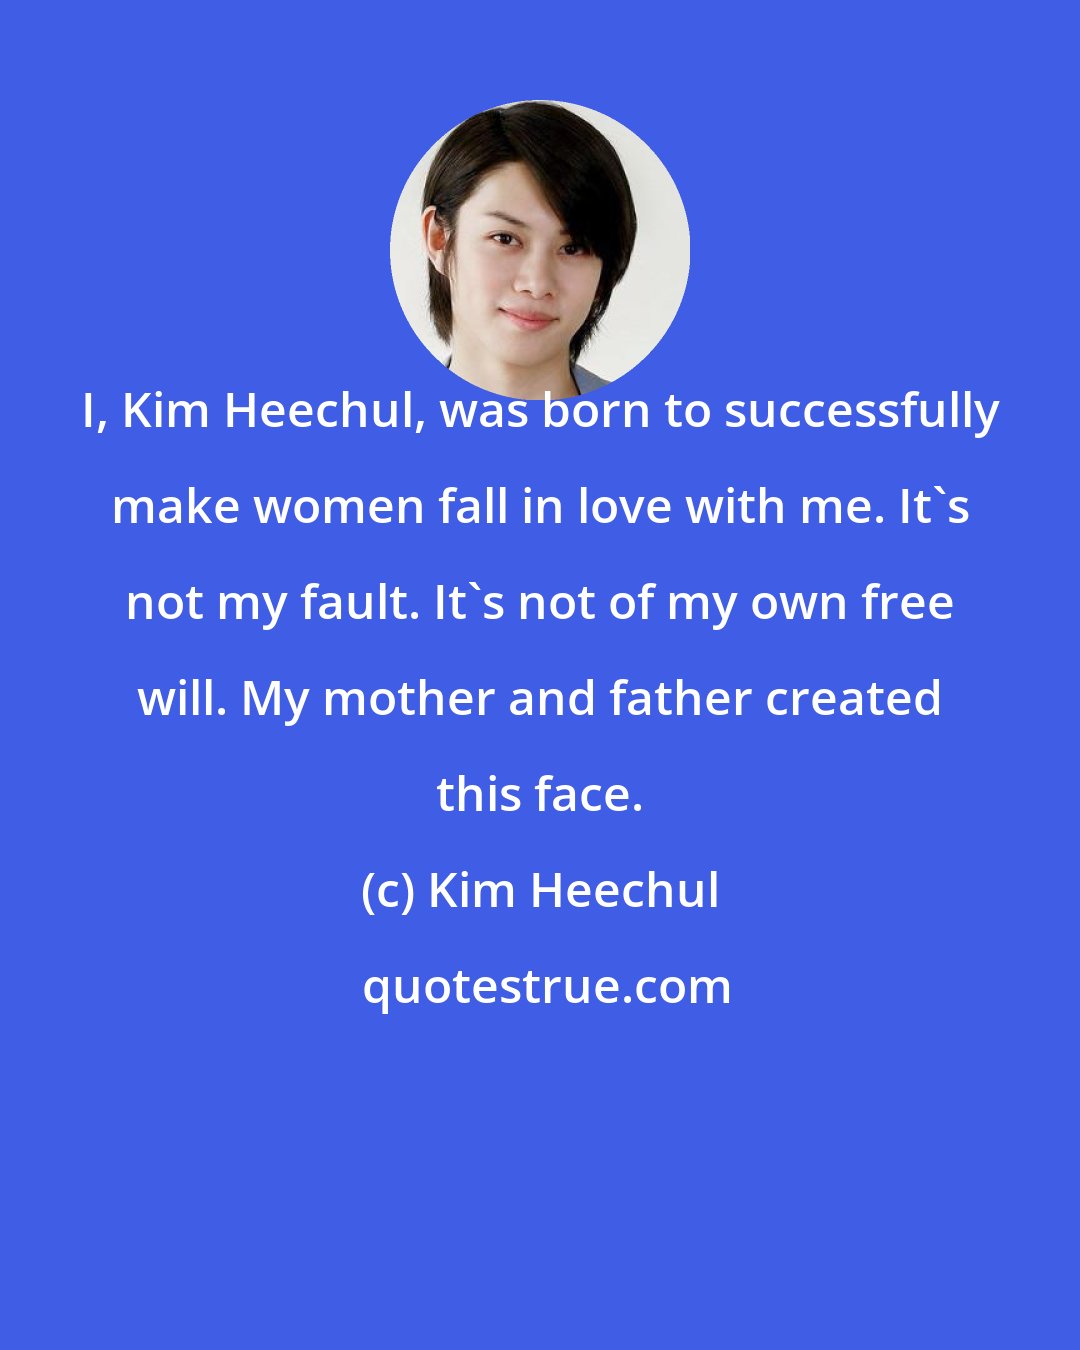 Kim Heechul: I, Kim Heechul, was born to successfully make women fall in love with me. It's not my fault. It's not of my own free will. My mother and father created this face.